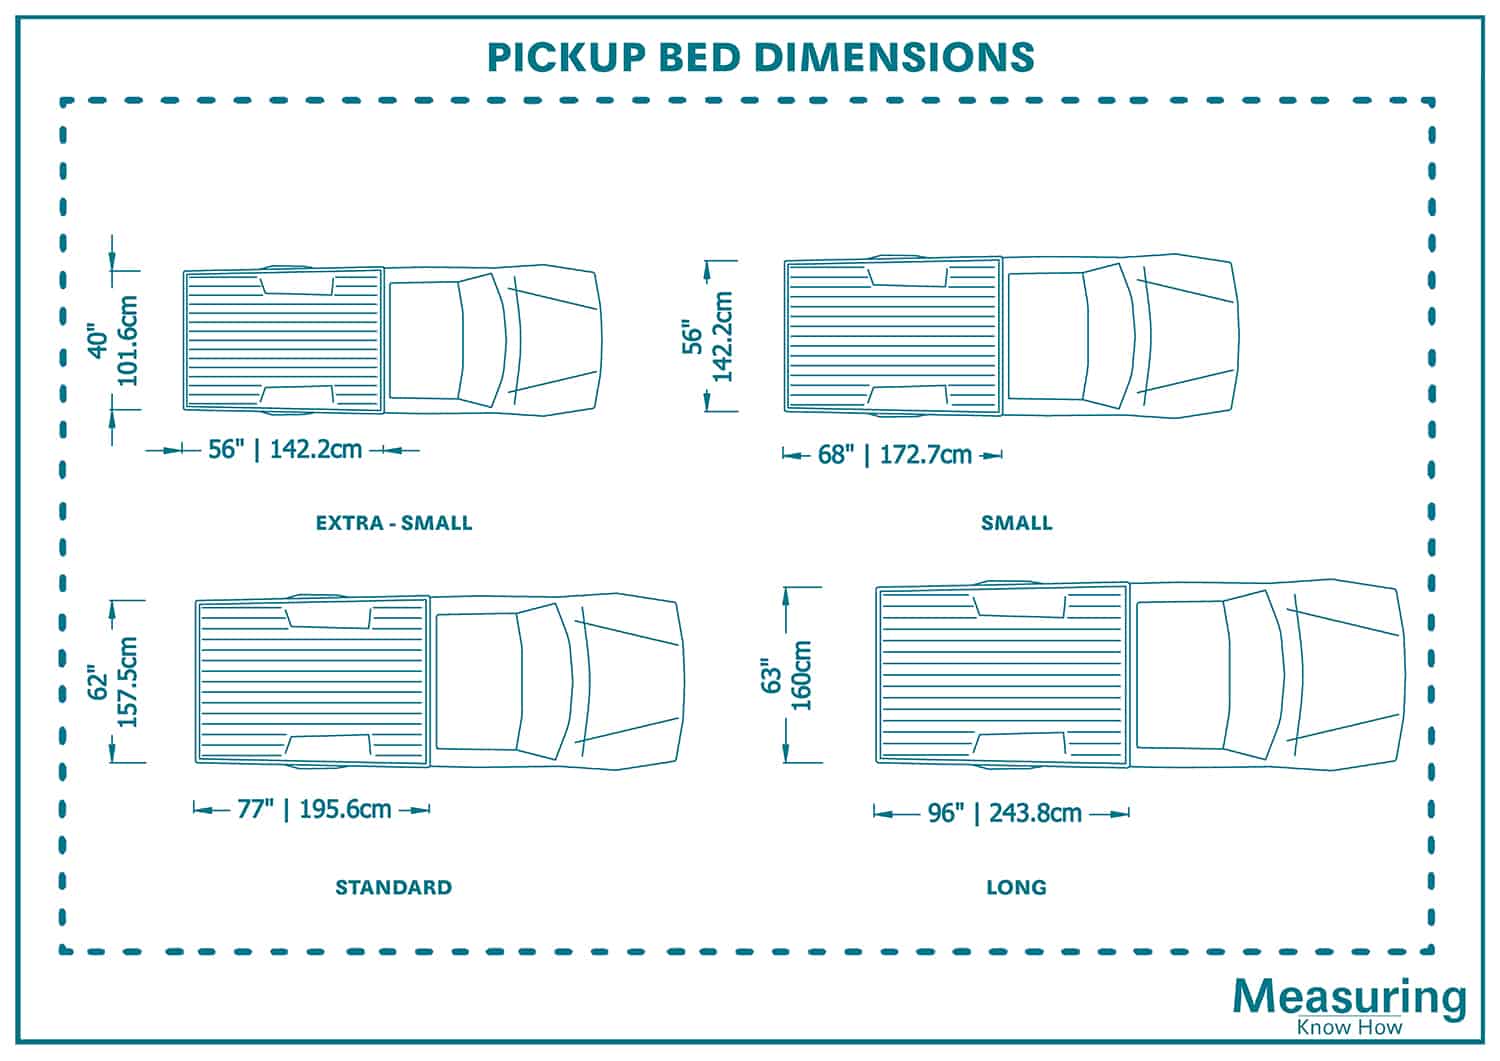 Pickup bed dimensions